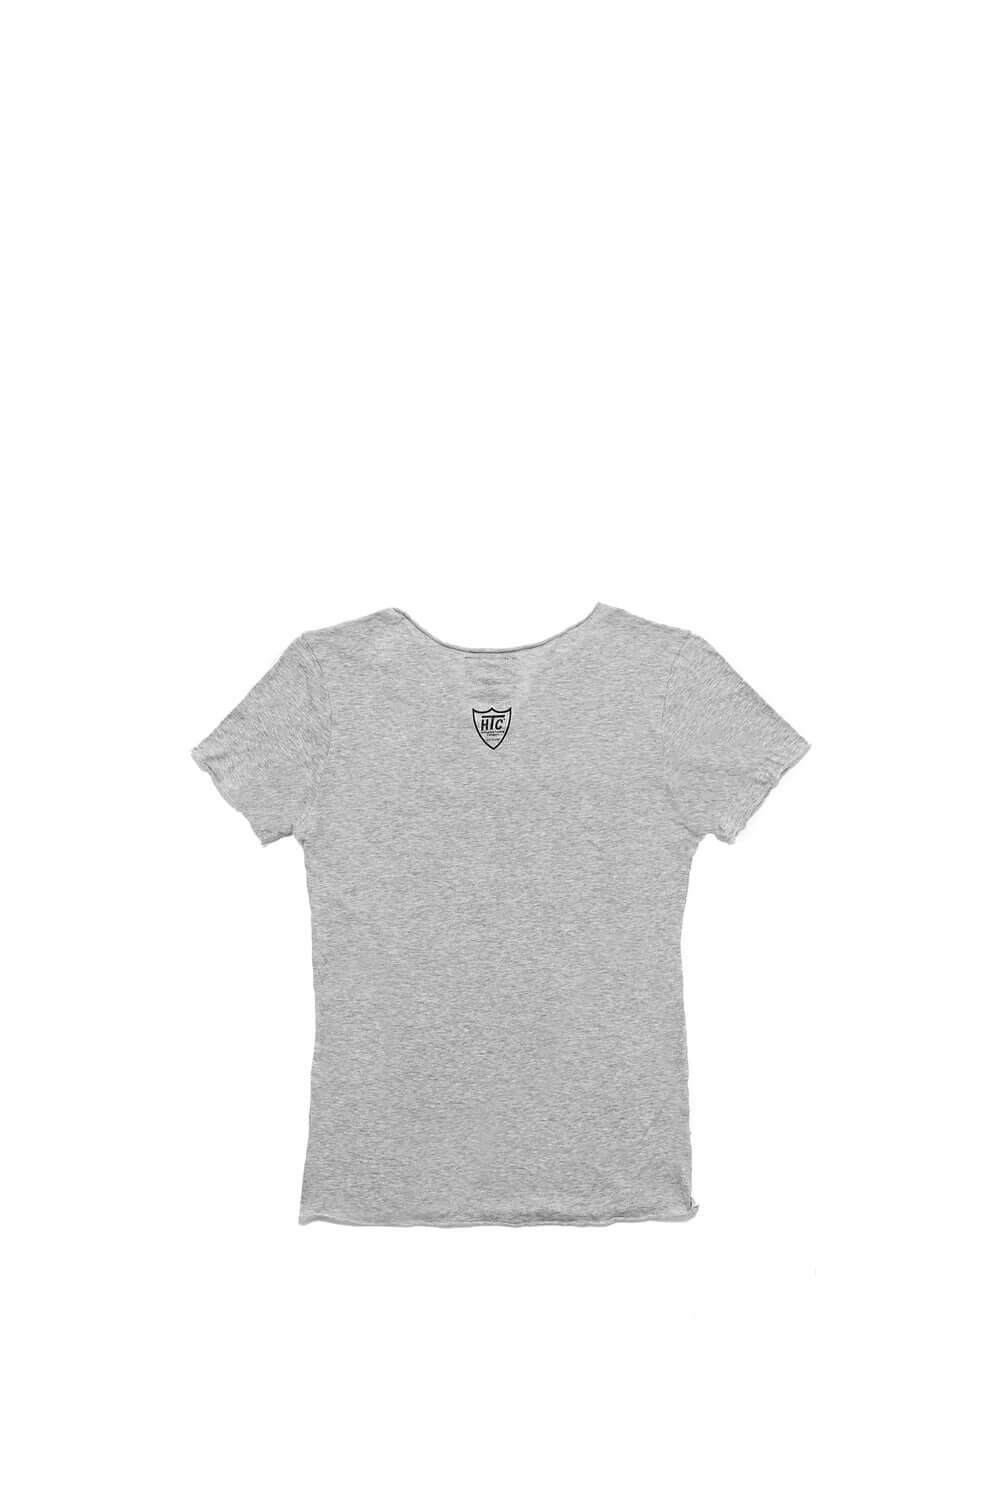 ZABRISKIE POINT WOMAN T-SHIRT Slim fit woman t-shirt printed on the front. 100% cotton HTC LOS ANGELES